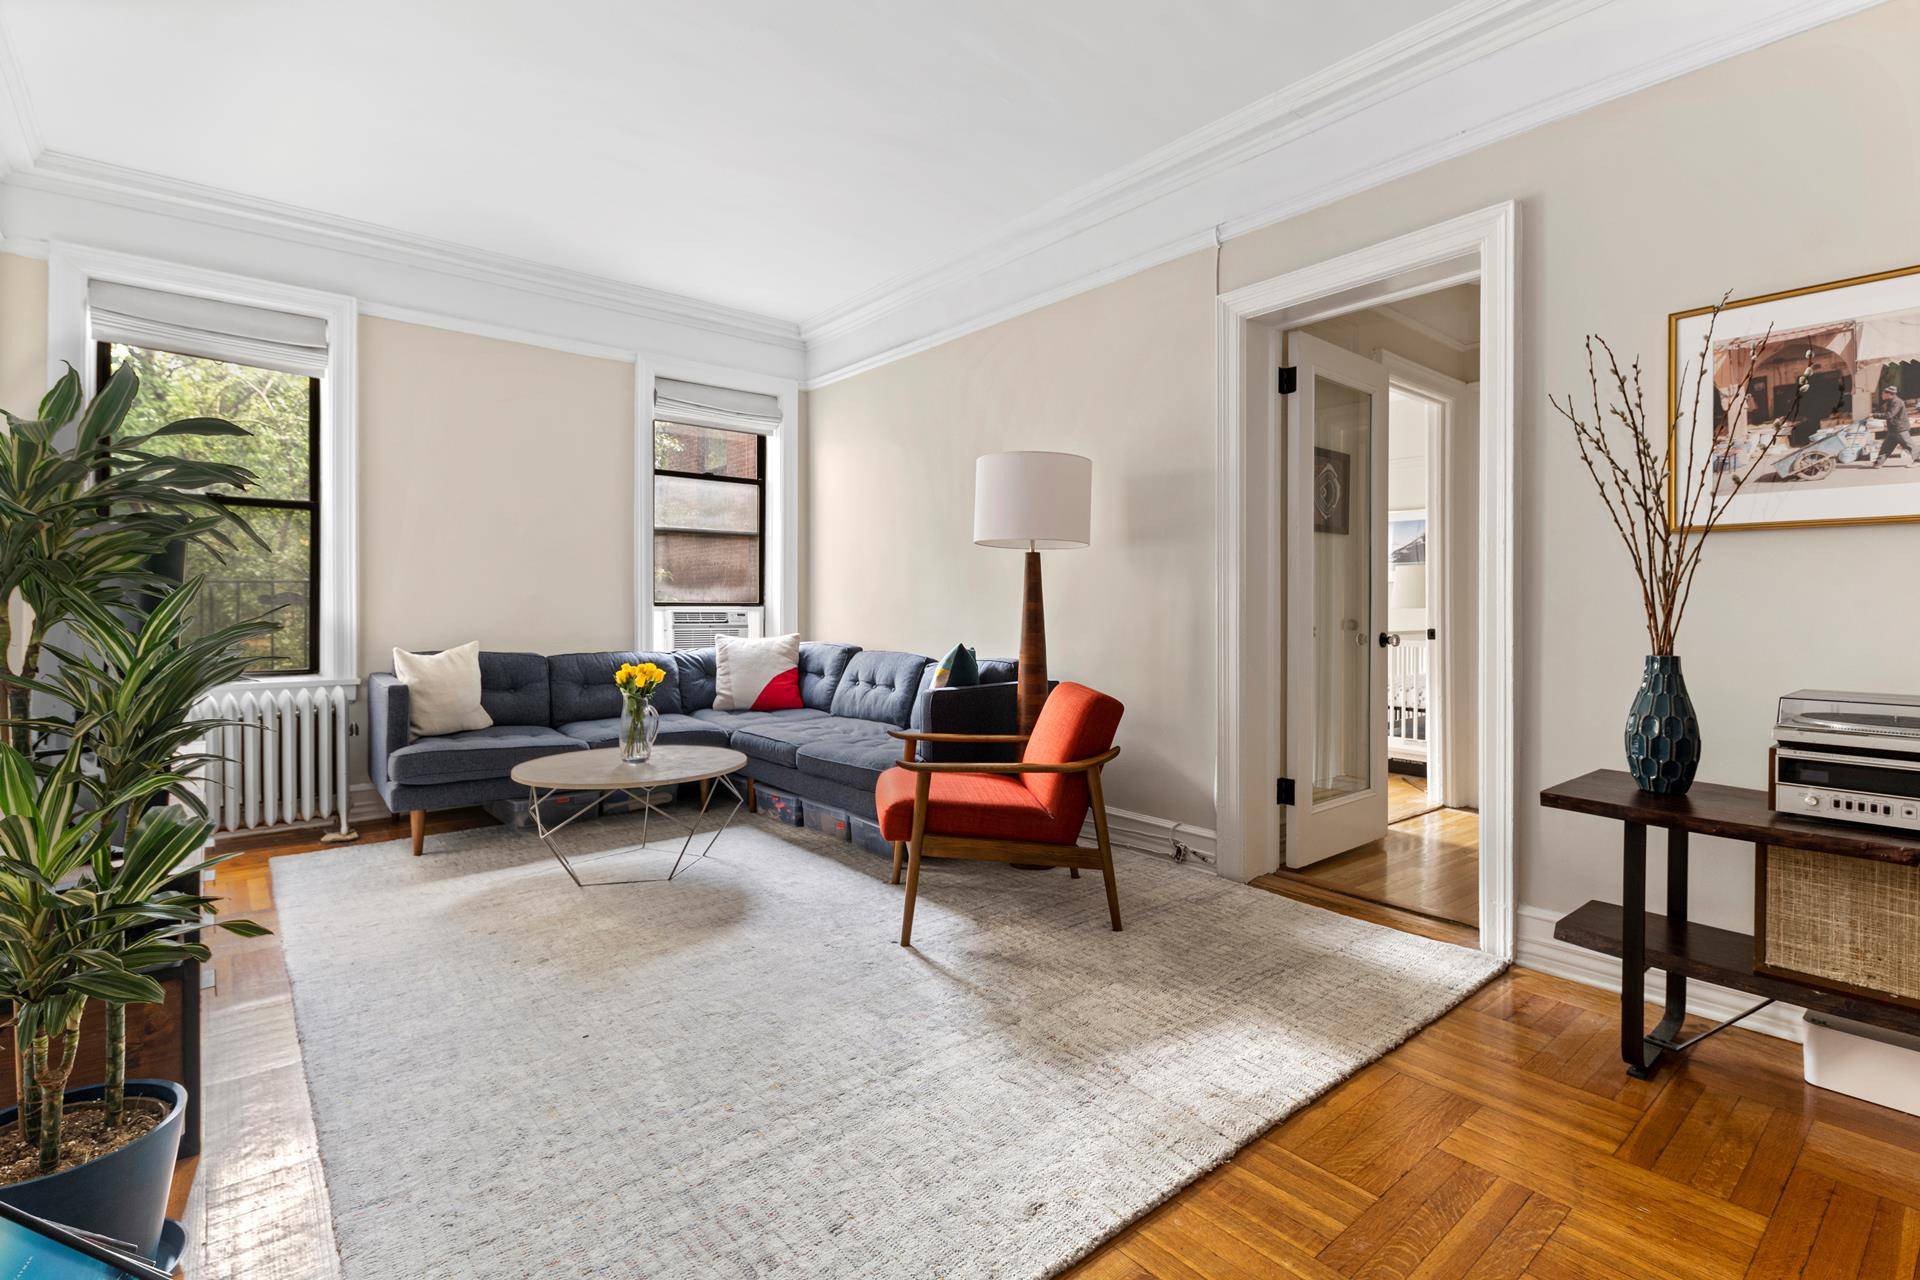 Newly renovated prewar two bedroom located in the heart of historic Brooklyn Heights.